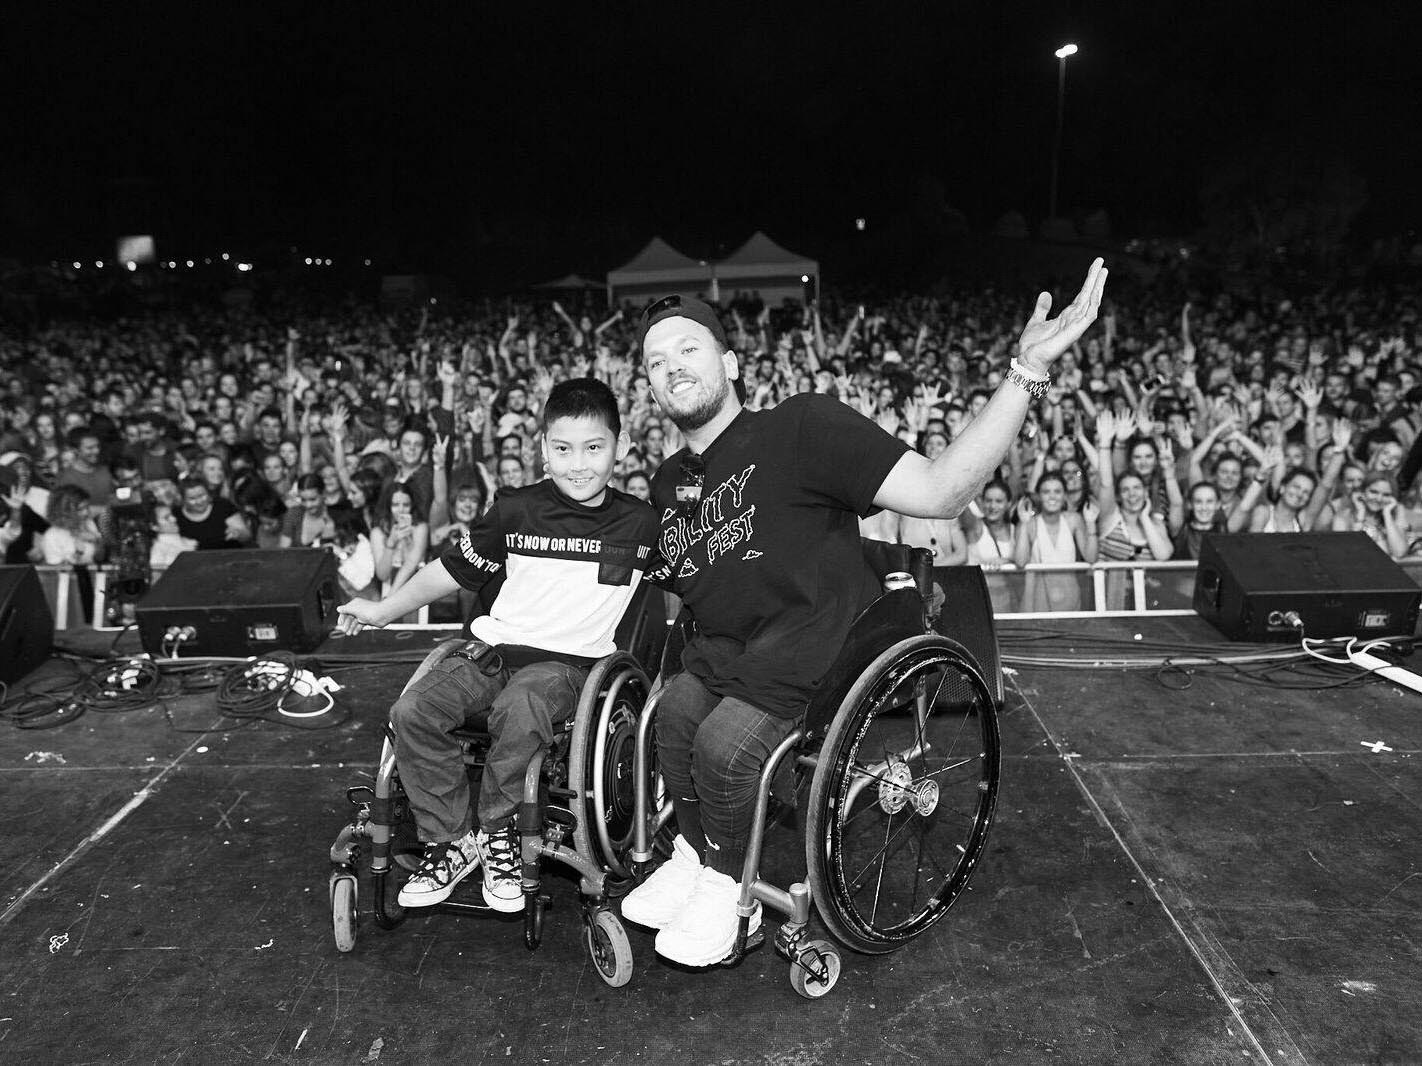 The festival aims to make music a platform to normalise disability by encouraging everyone to come together in celebration of live music [Source: Hireup]
